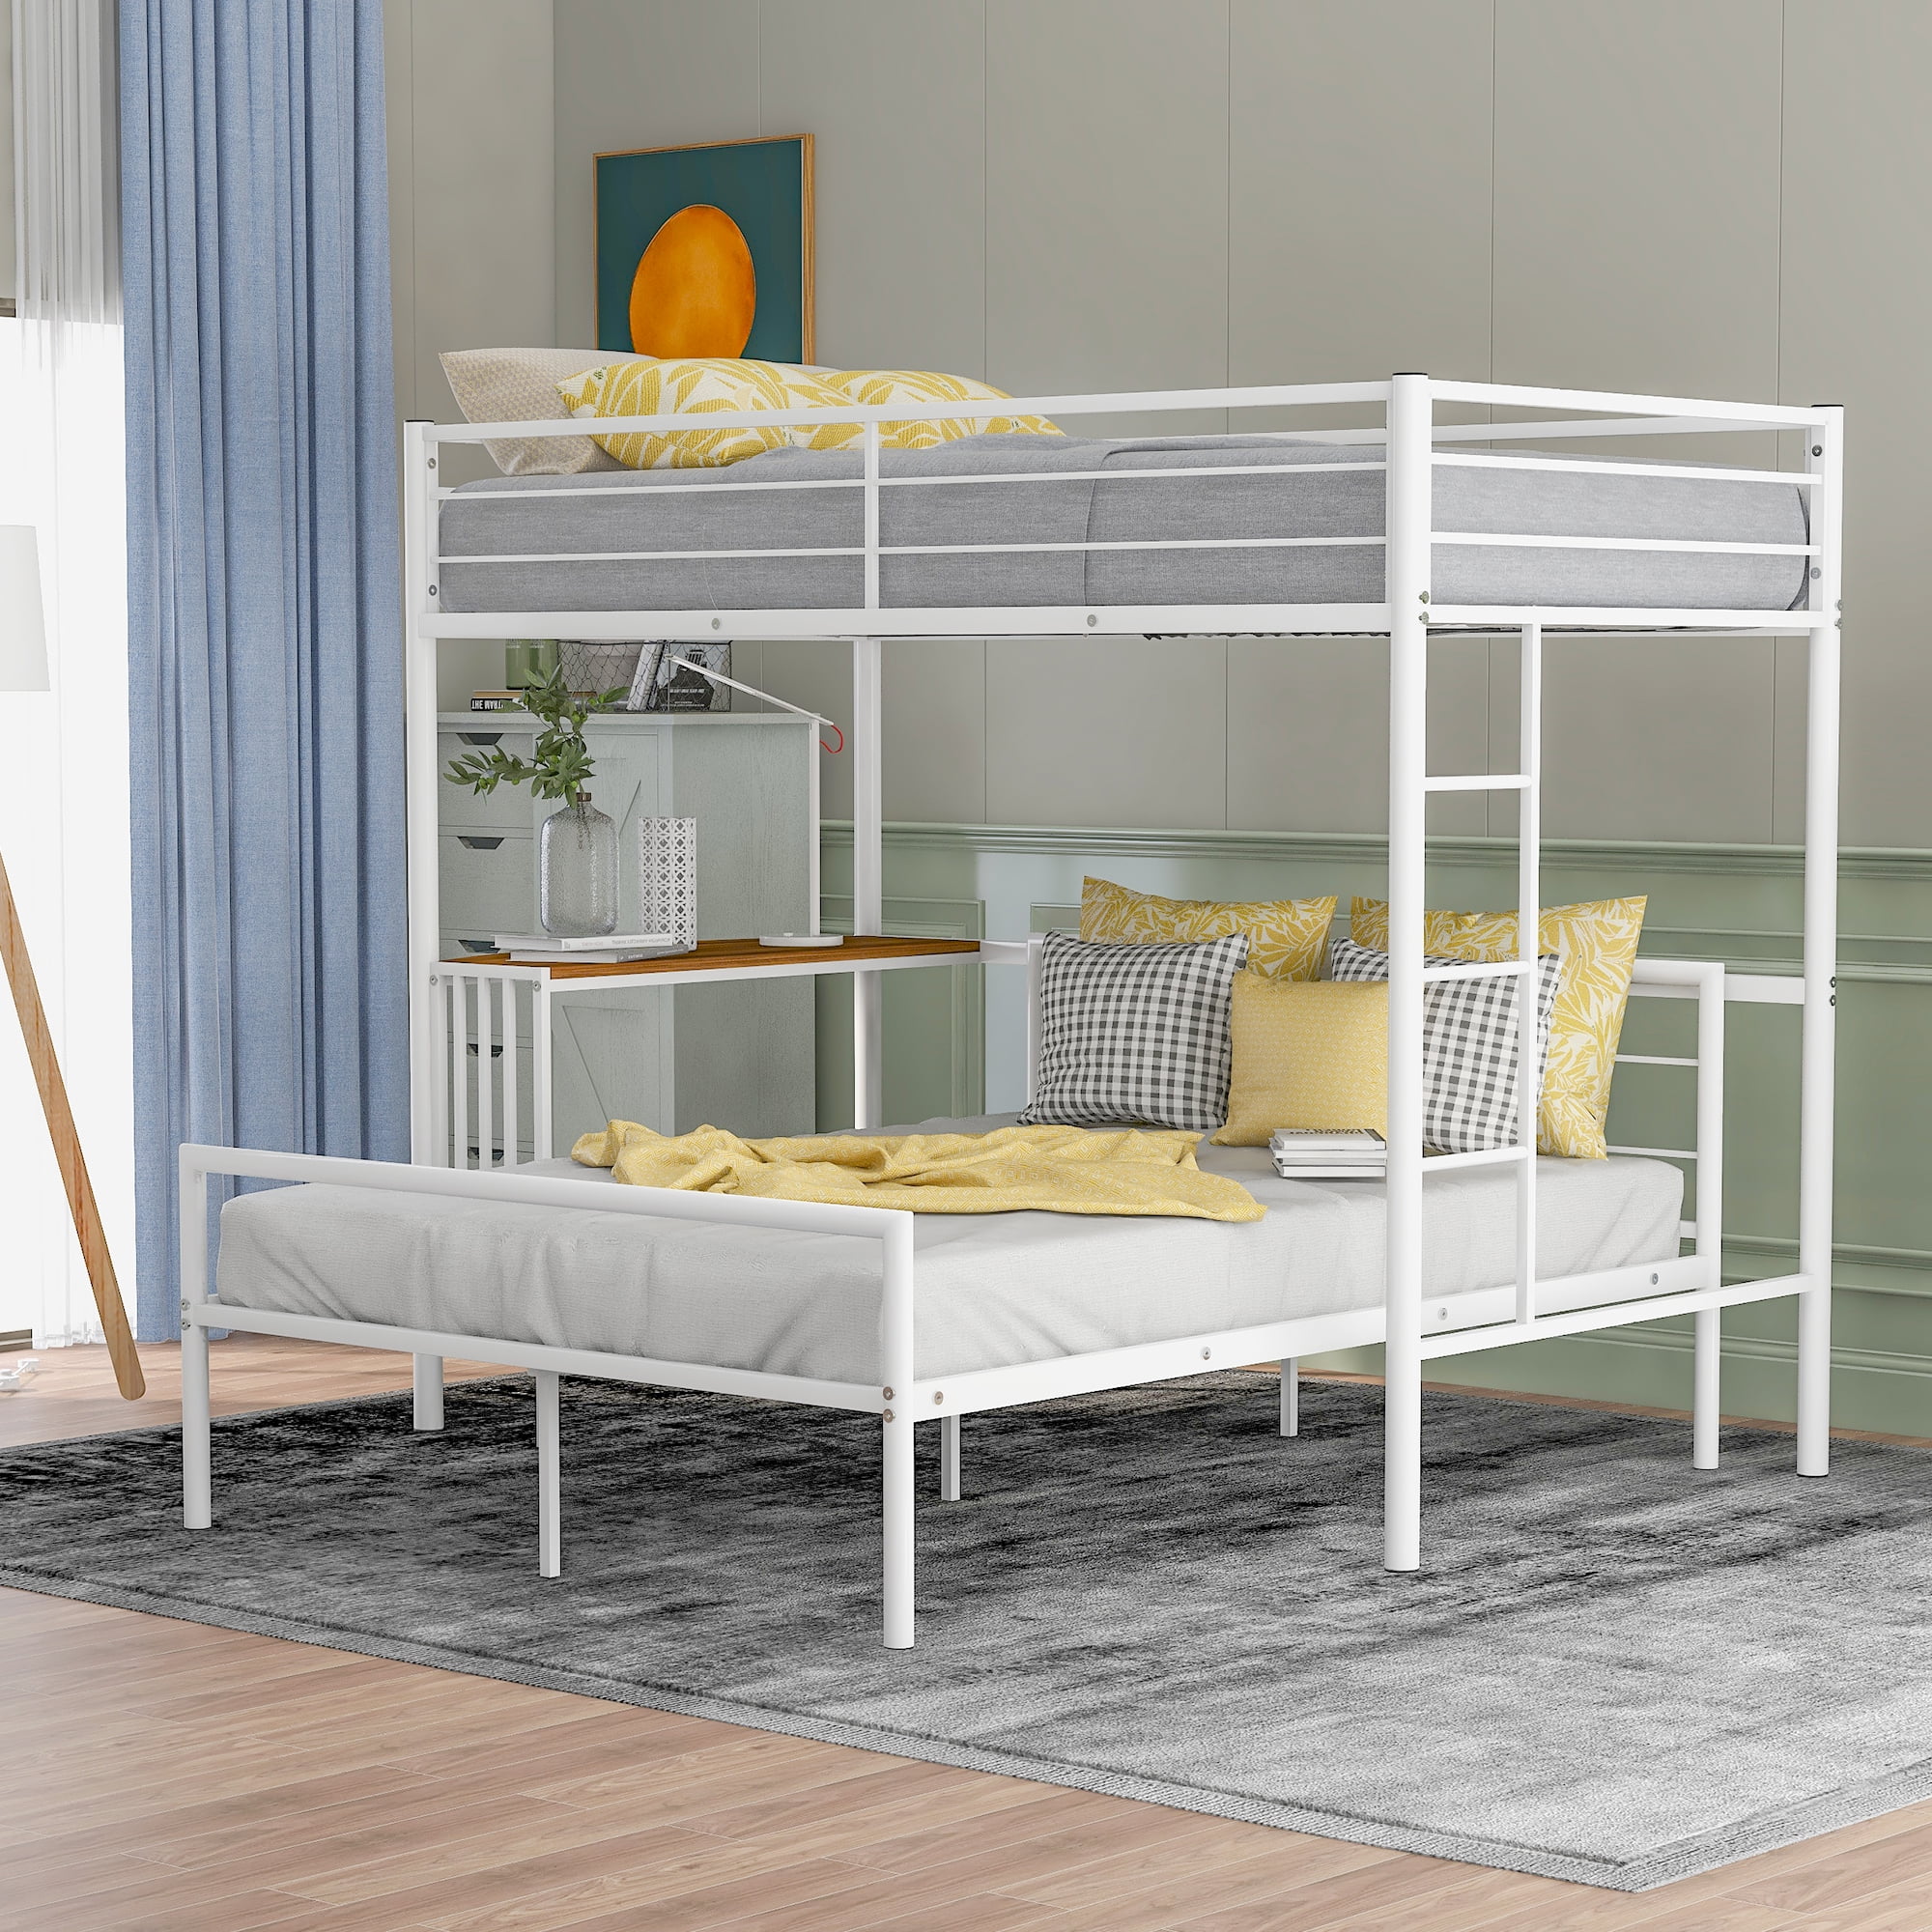 Full Bunk Bed Sy Metal, Twin Bunk Beds That Can Separate